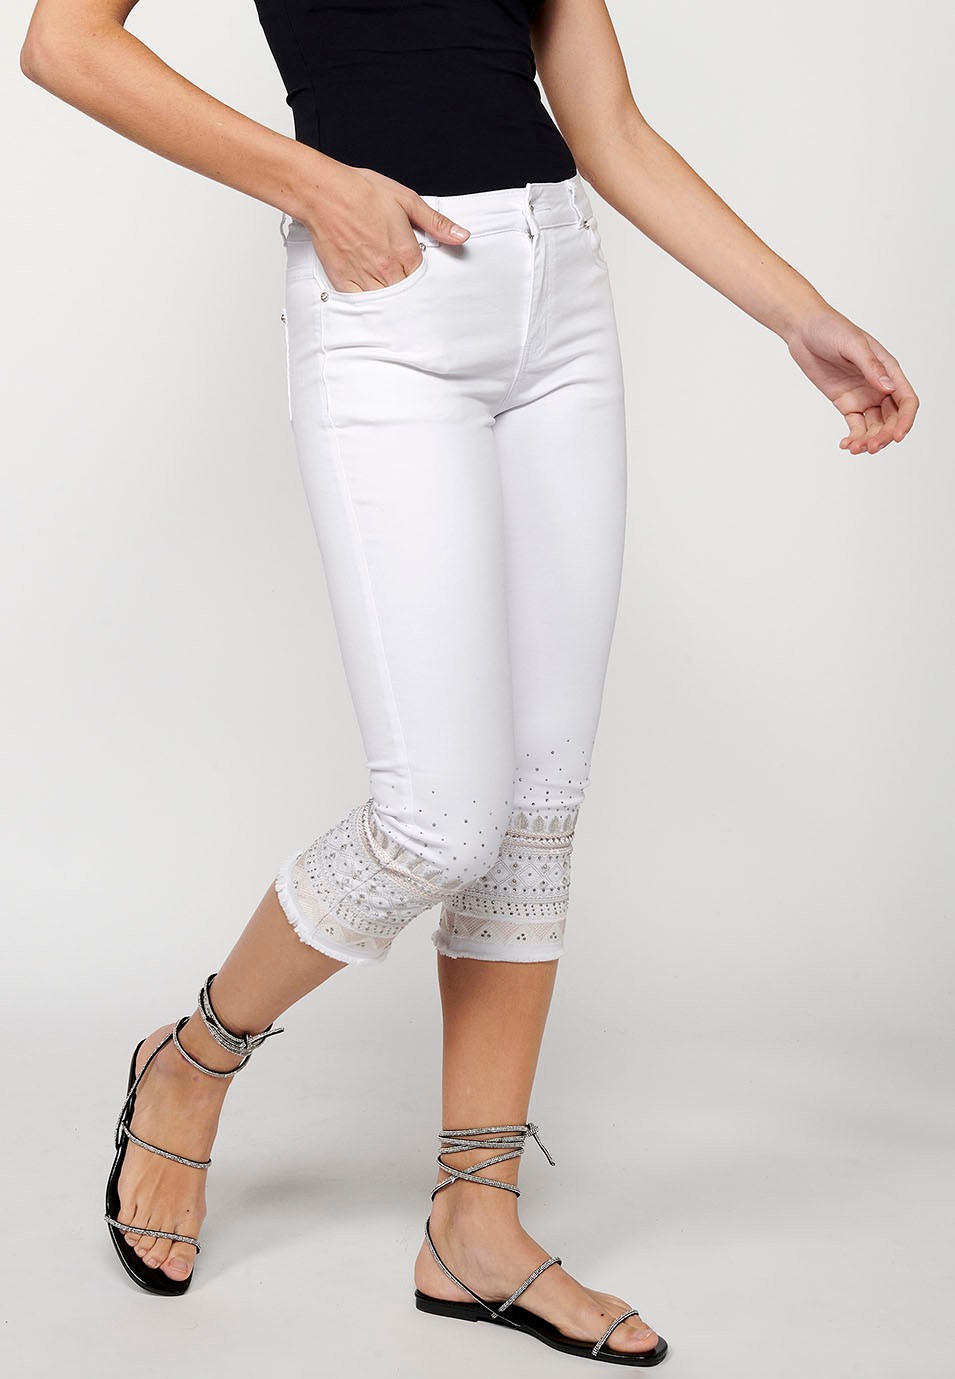 Pirate pants finished with floral embroidery and front closure with zipper and button in White for Women 3